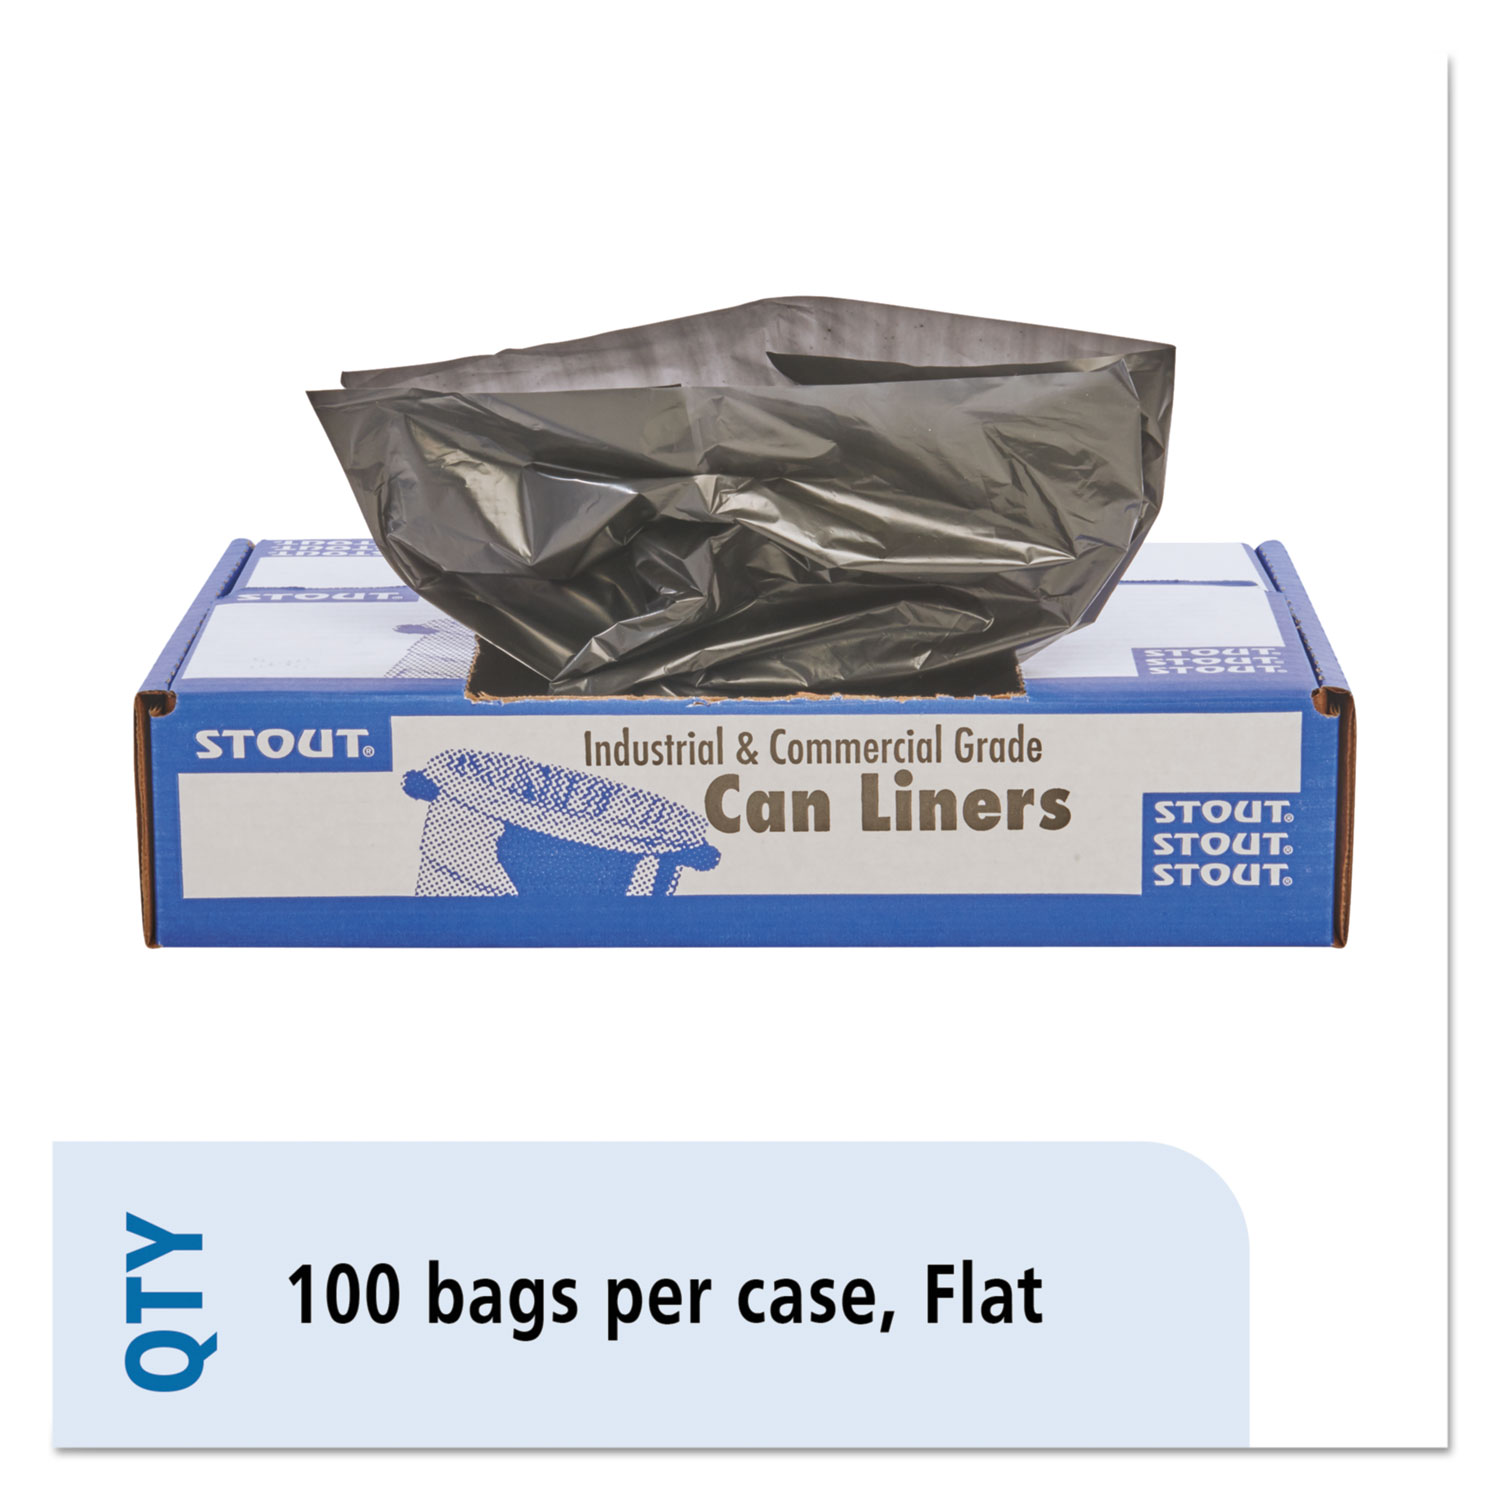  Stout by Envision T3340B15 Total Recycled Content Plastic Trash Bags, 33 gal, 1.5 mil, 33 x 40, Brown/Black, 100/Carton (STOT3340B15) 